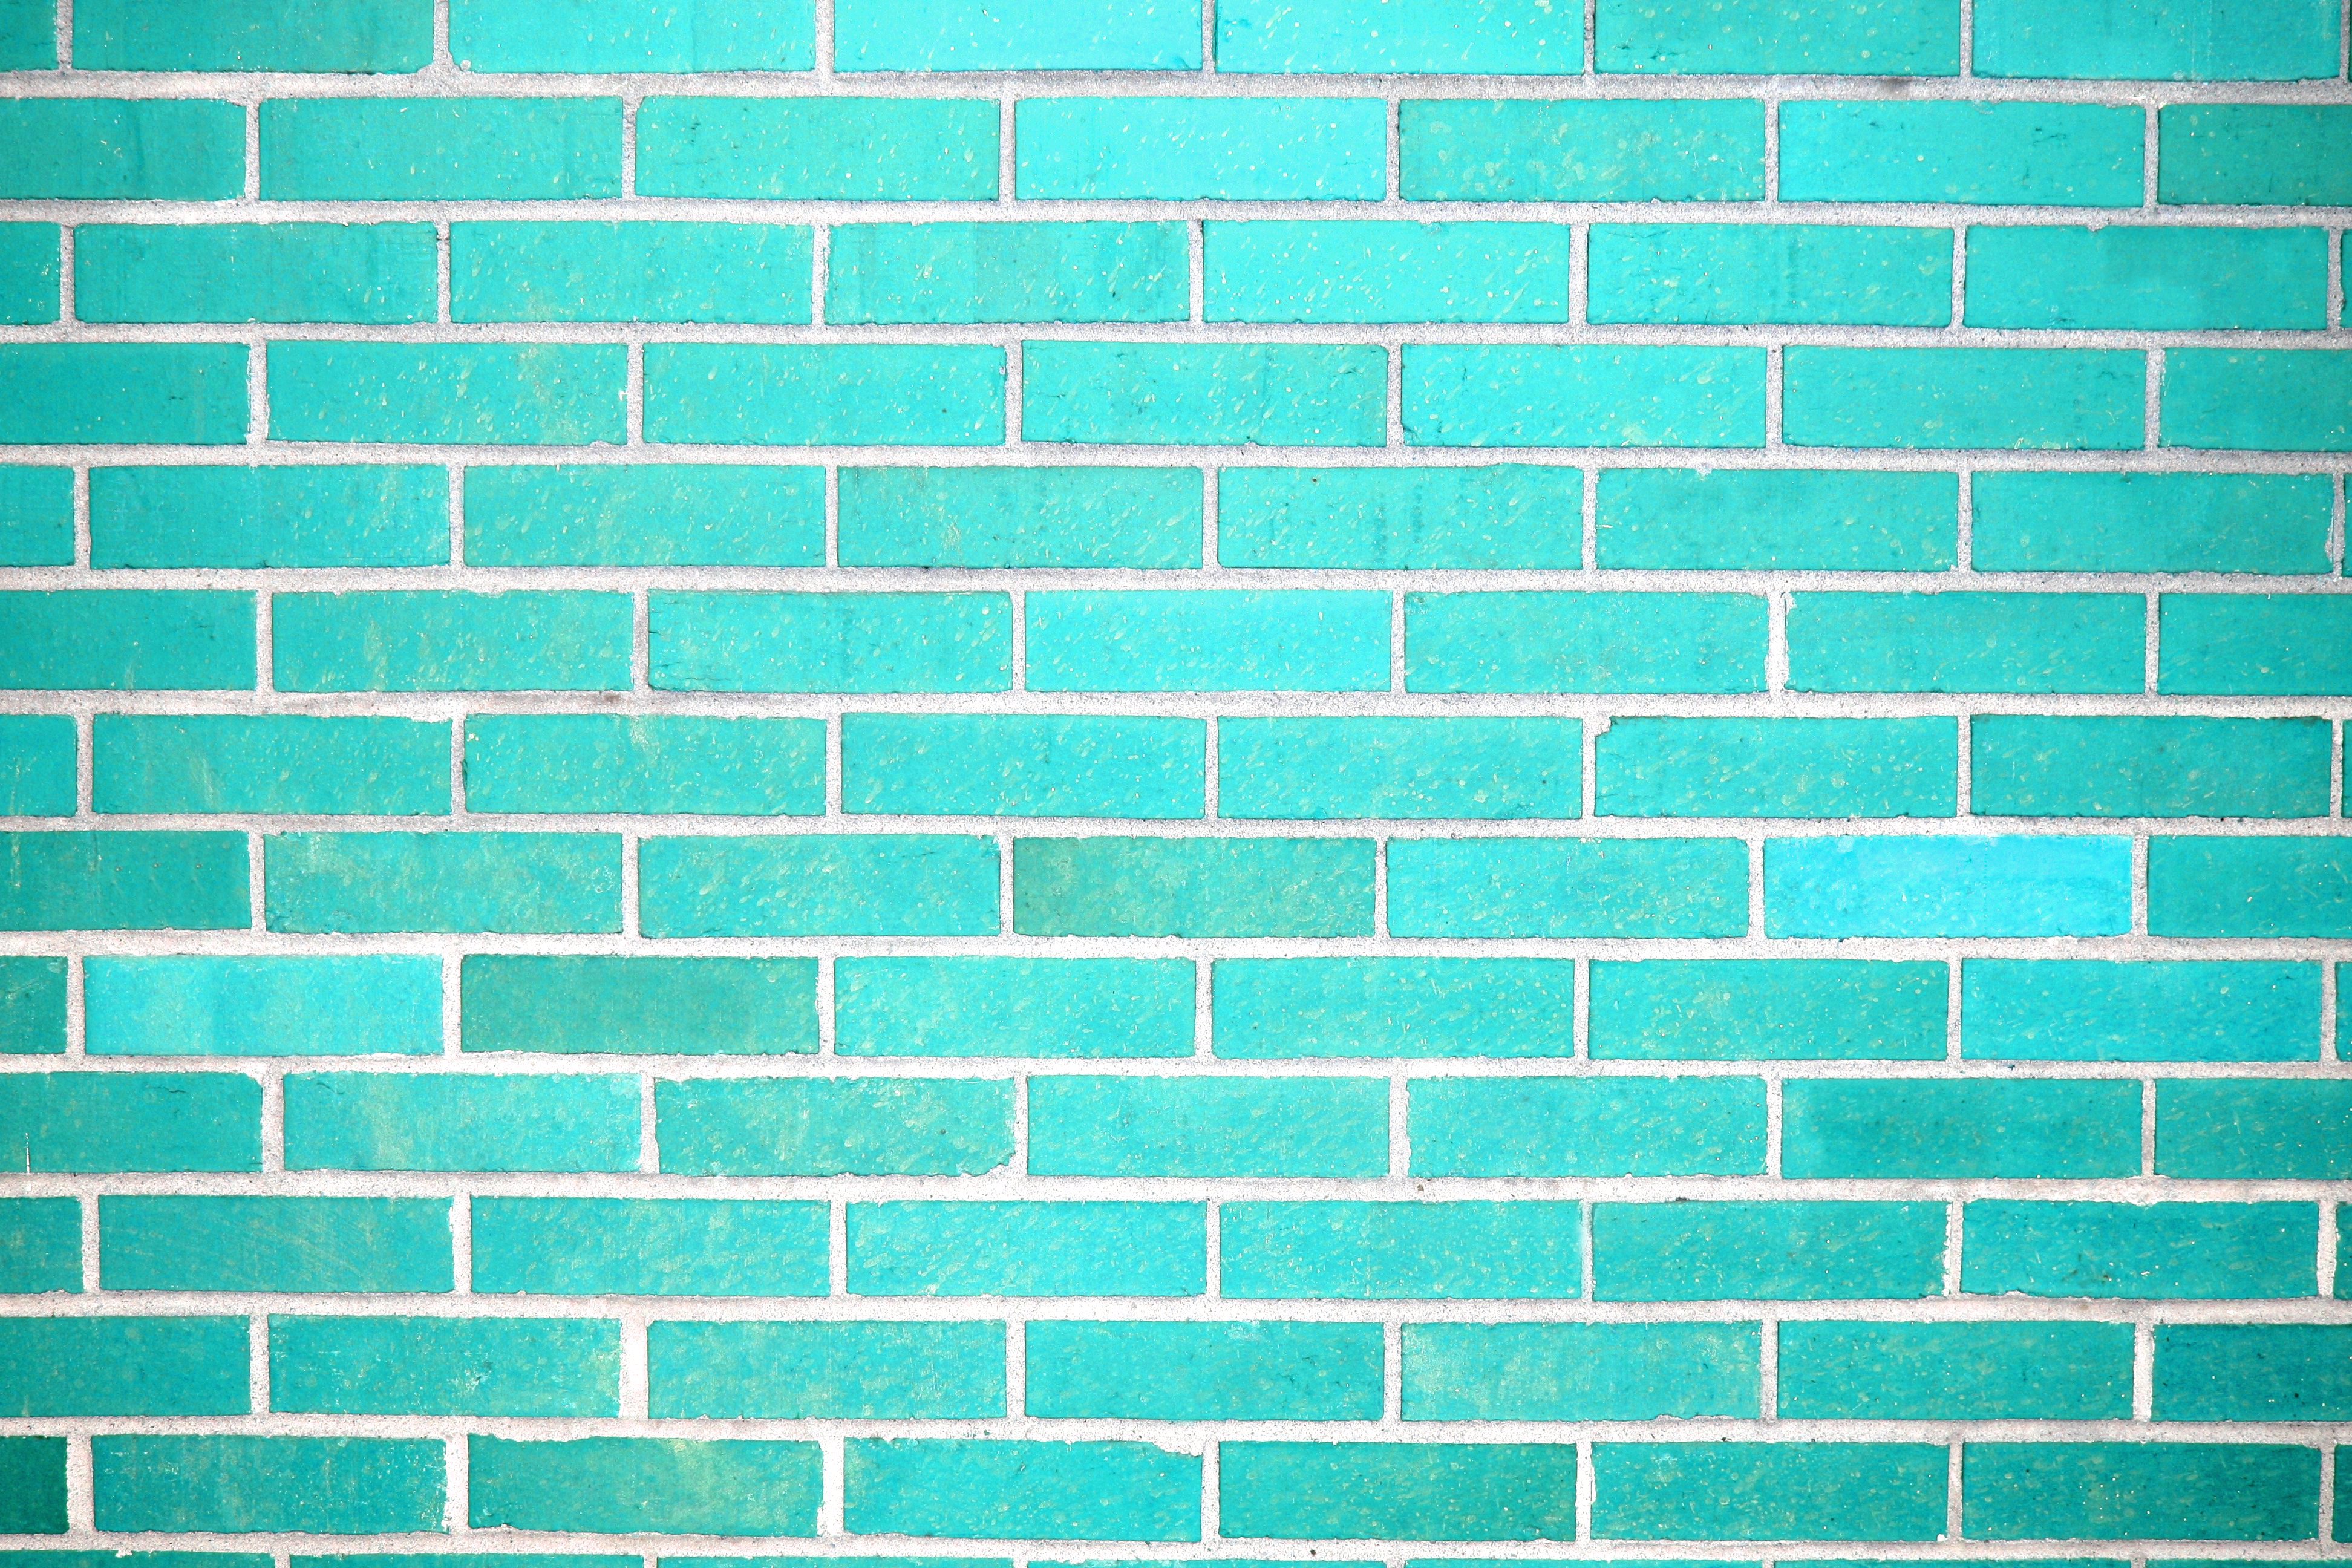 Teal Brick Wall Texture Picture Free Photograph Photos Public